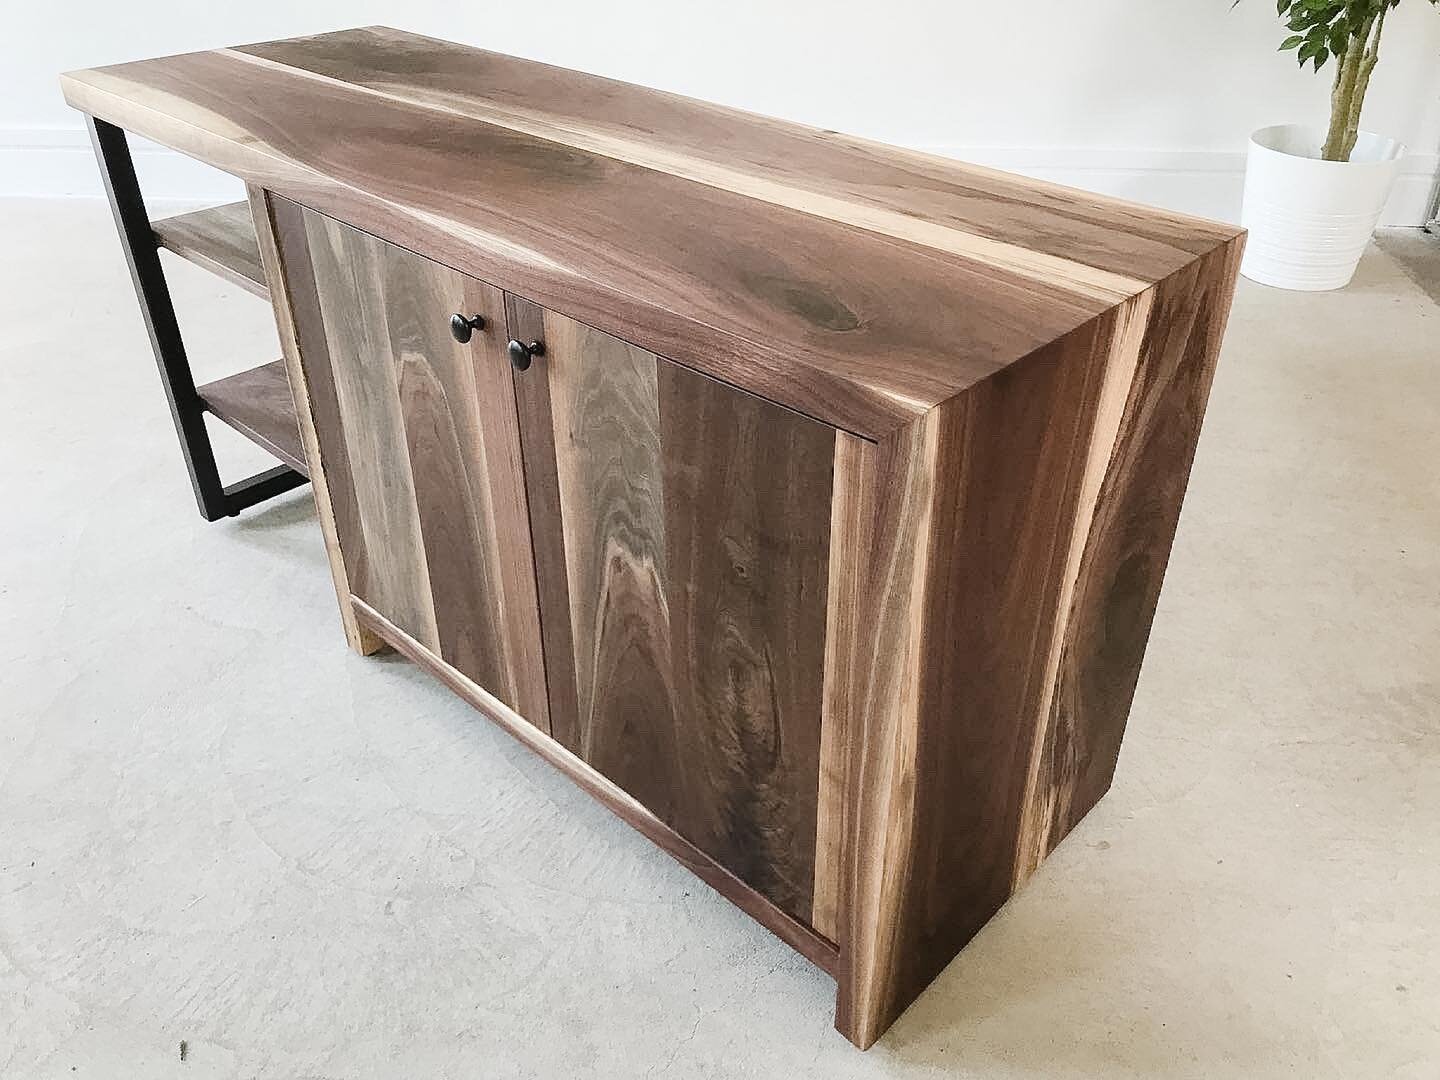 This walnut sideboard features a waterfall edge, open shelving, and enclosed doors. The wood grains flowing over the side of the piece has got to be our favourite part! Are you a fan of the waterfall edge?

#custommade #customfurniture #customfurnitu